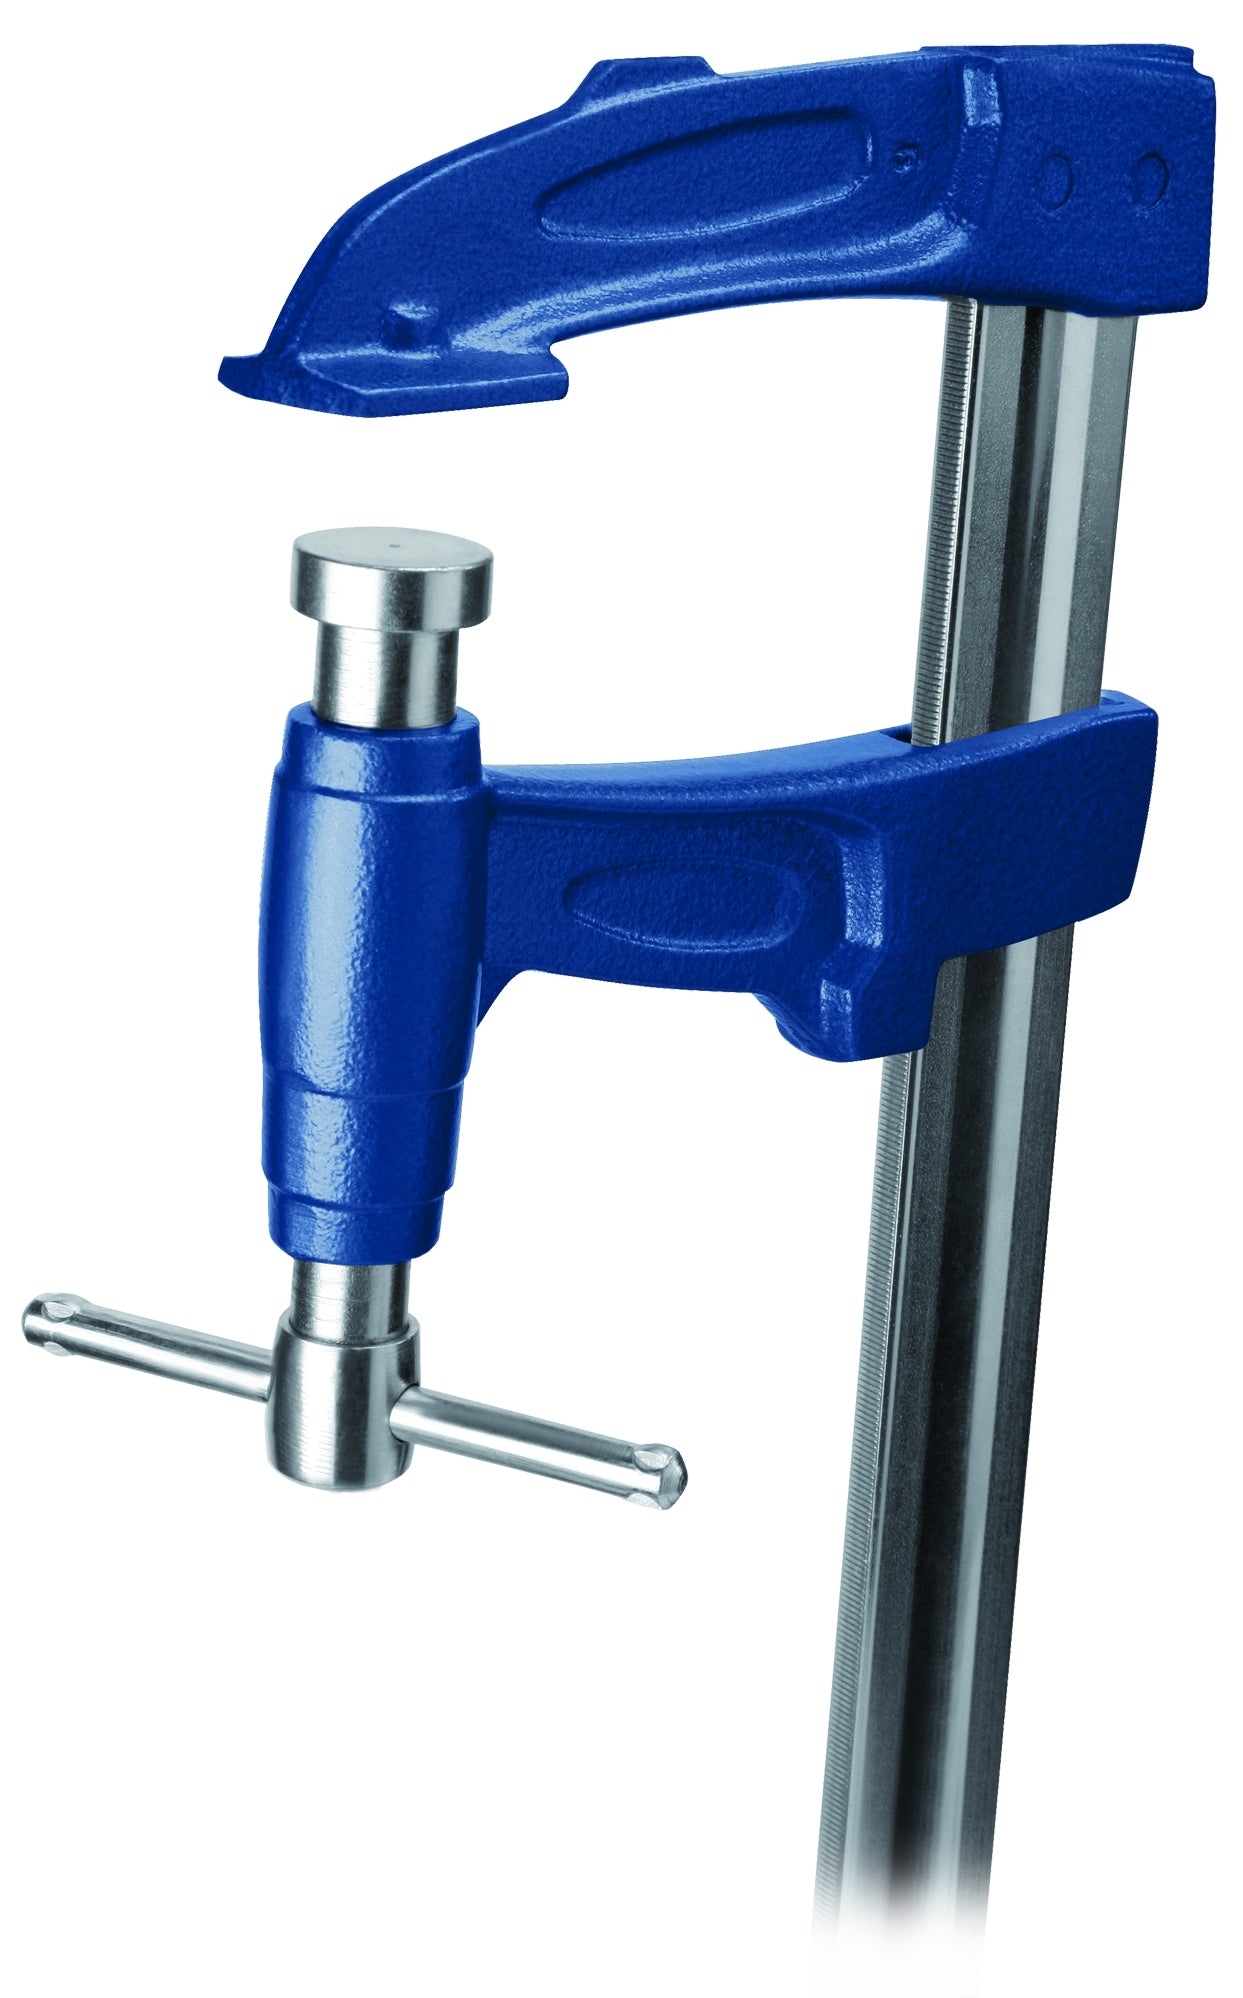 FX Xtreme F Welding Clamps by Excision